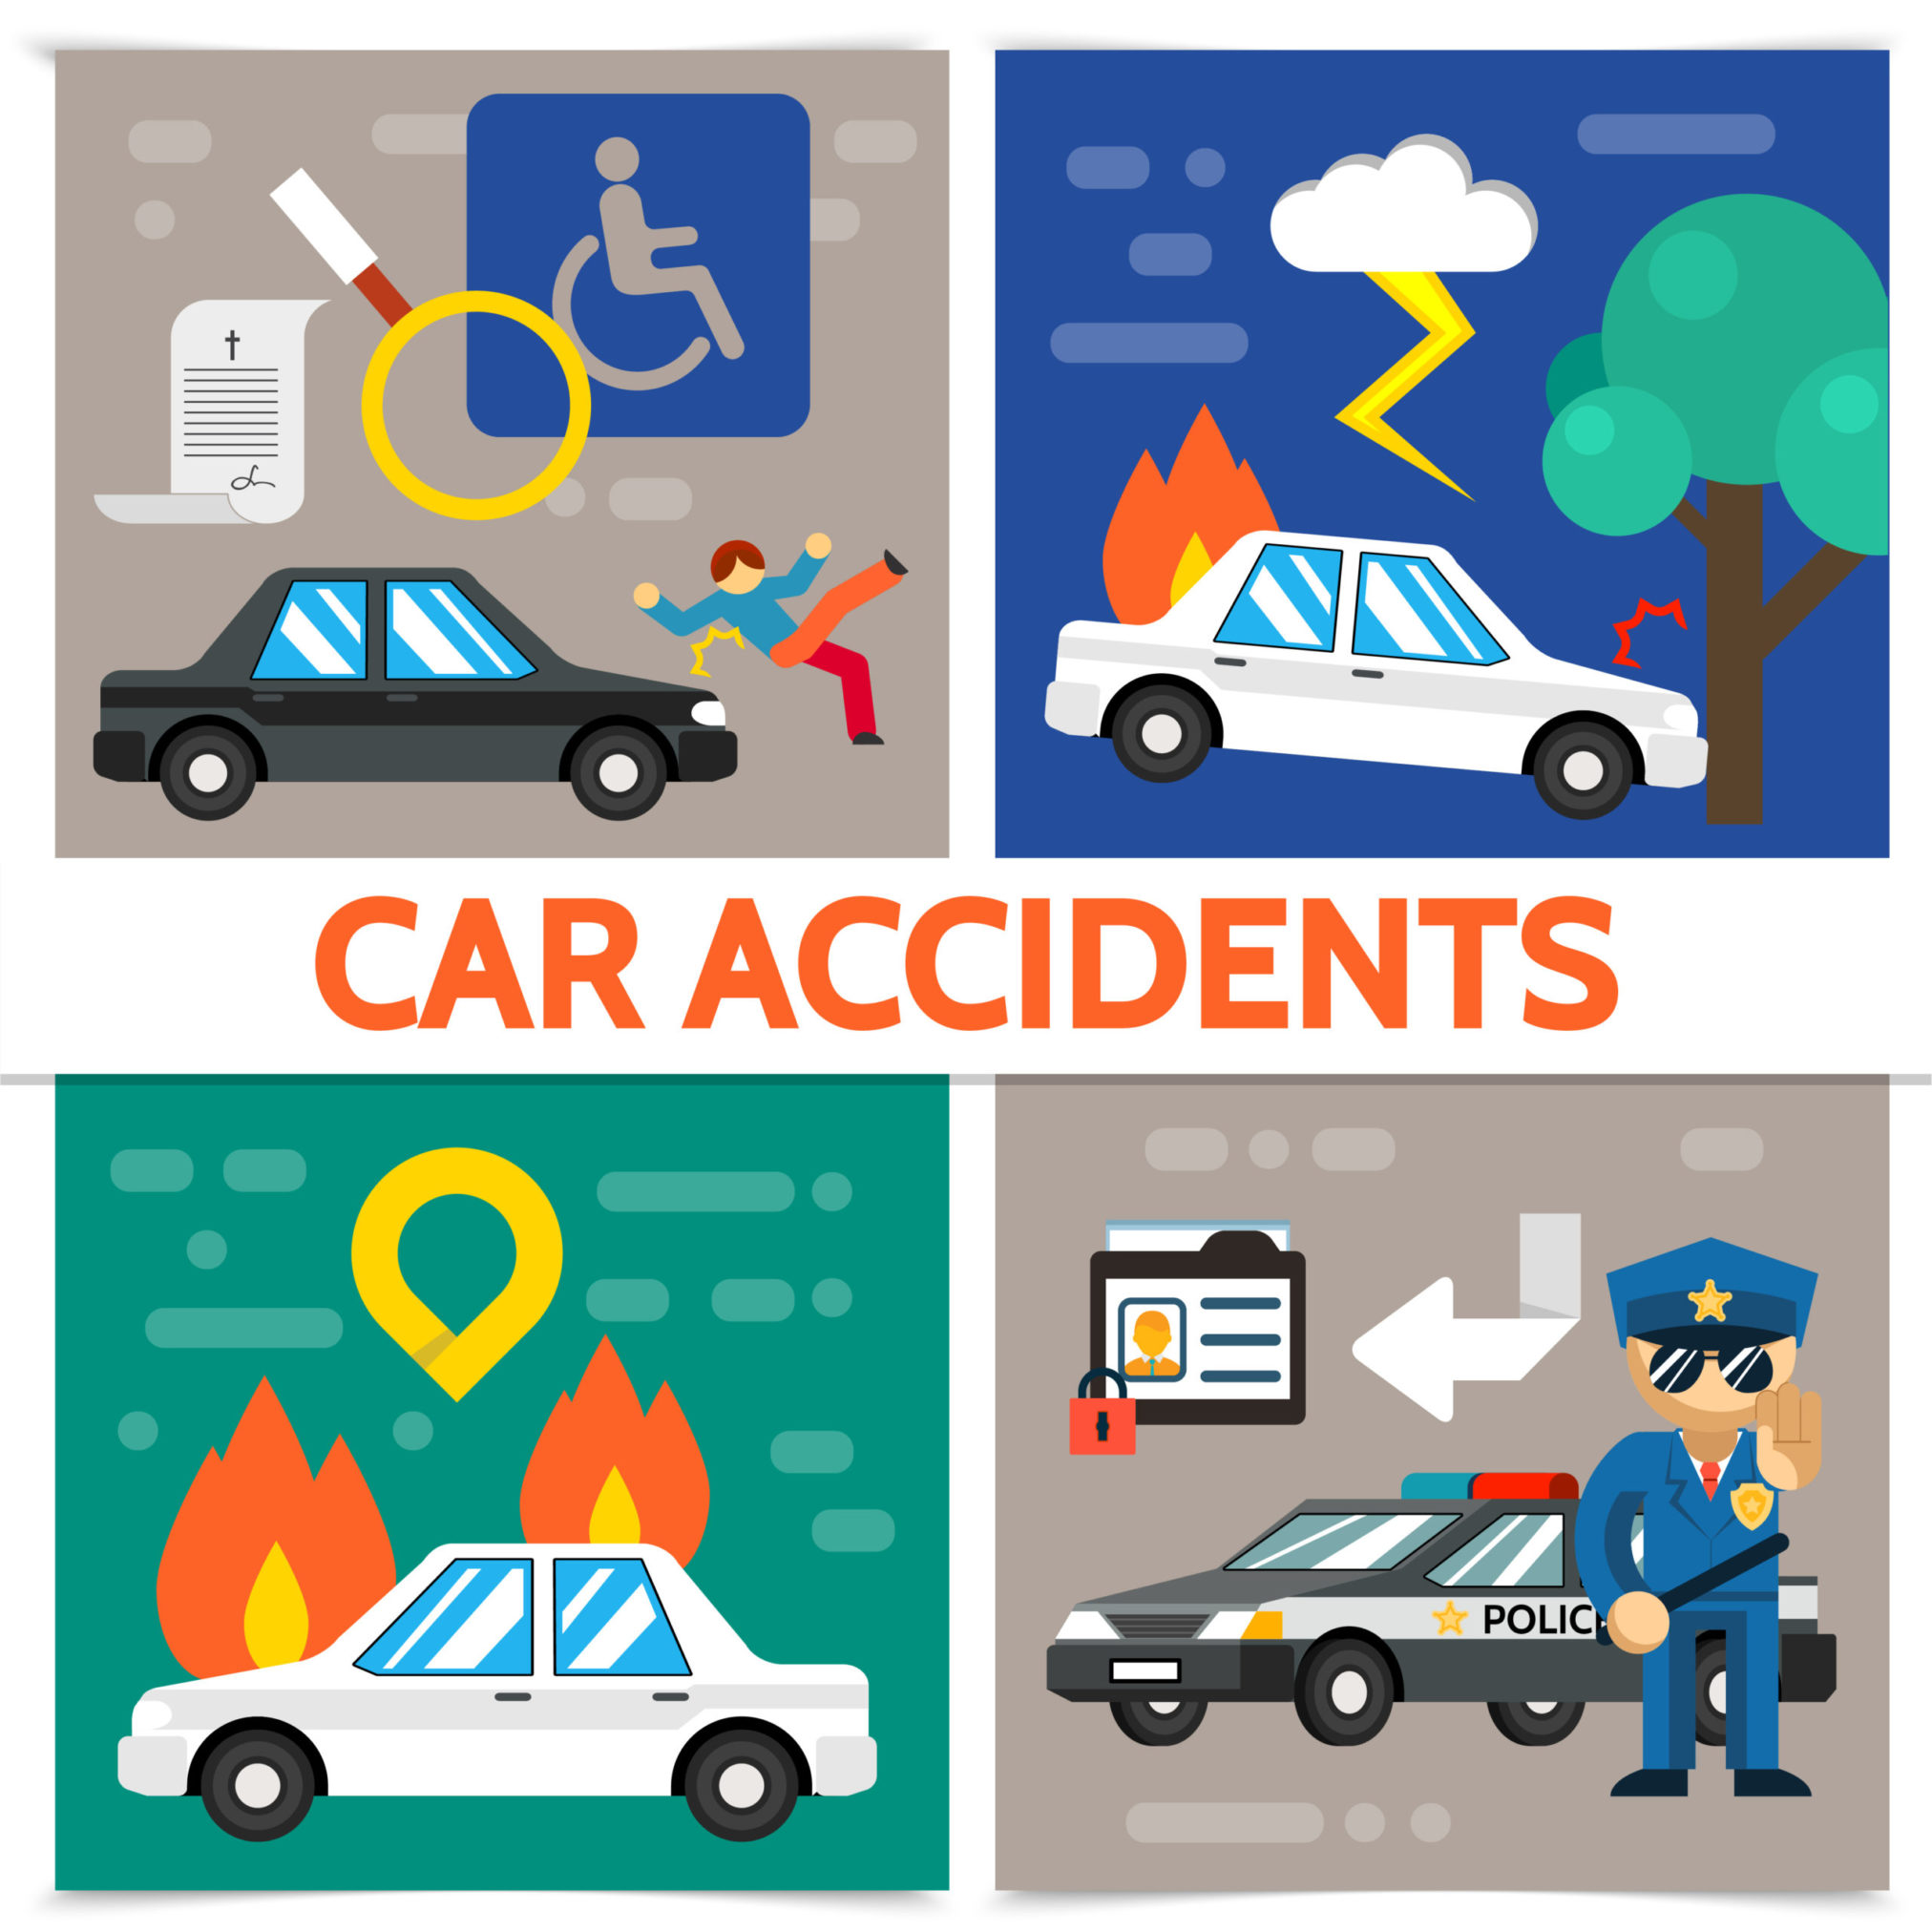 Defensive driving can help prevent car accidents